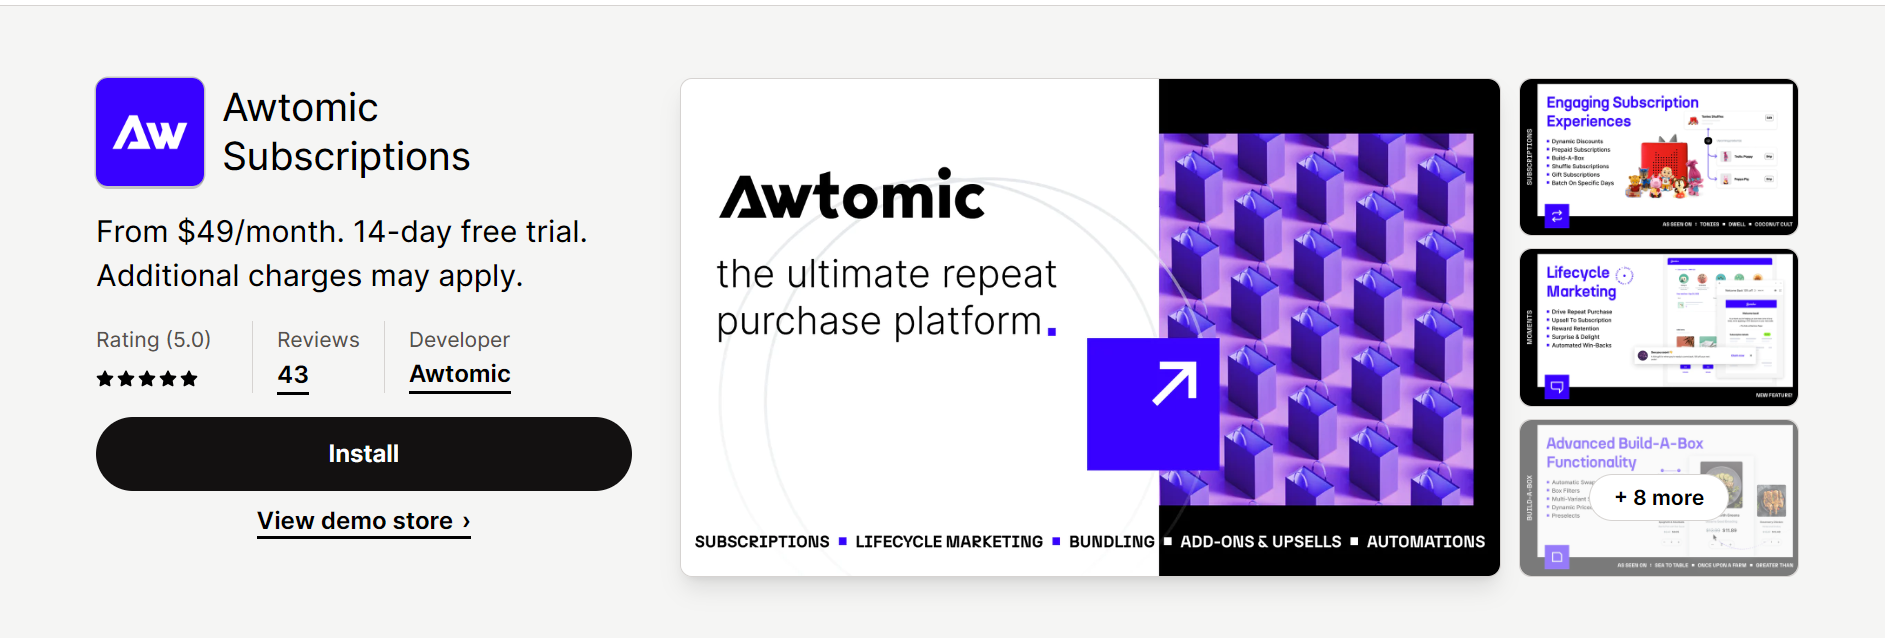 Awtomic Subscriptions